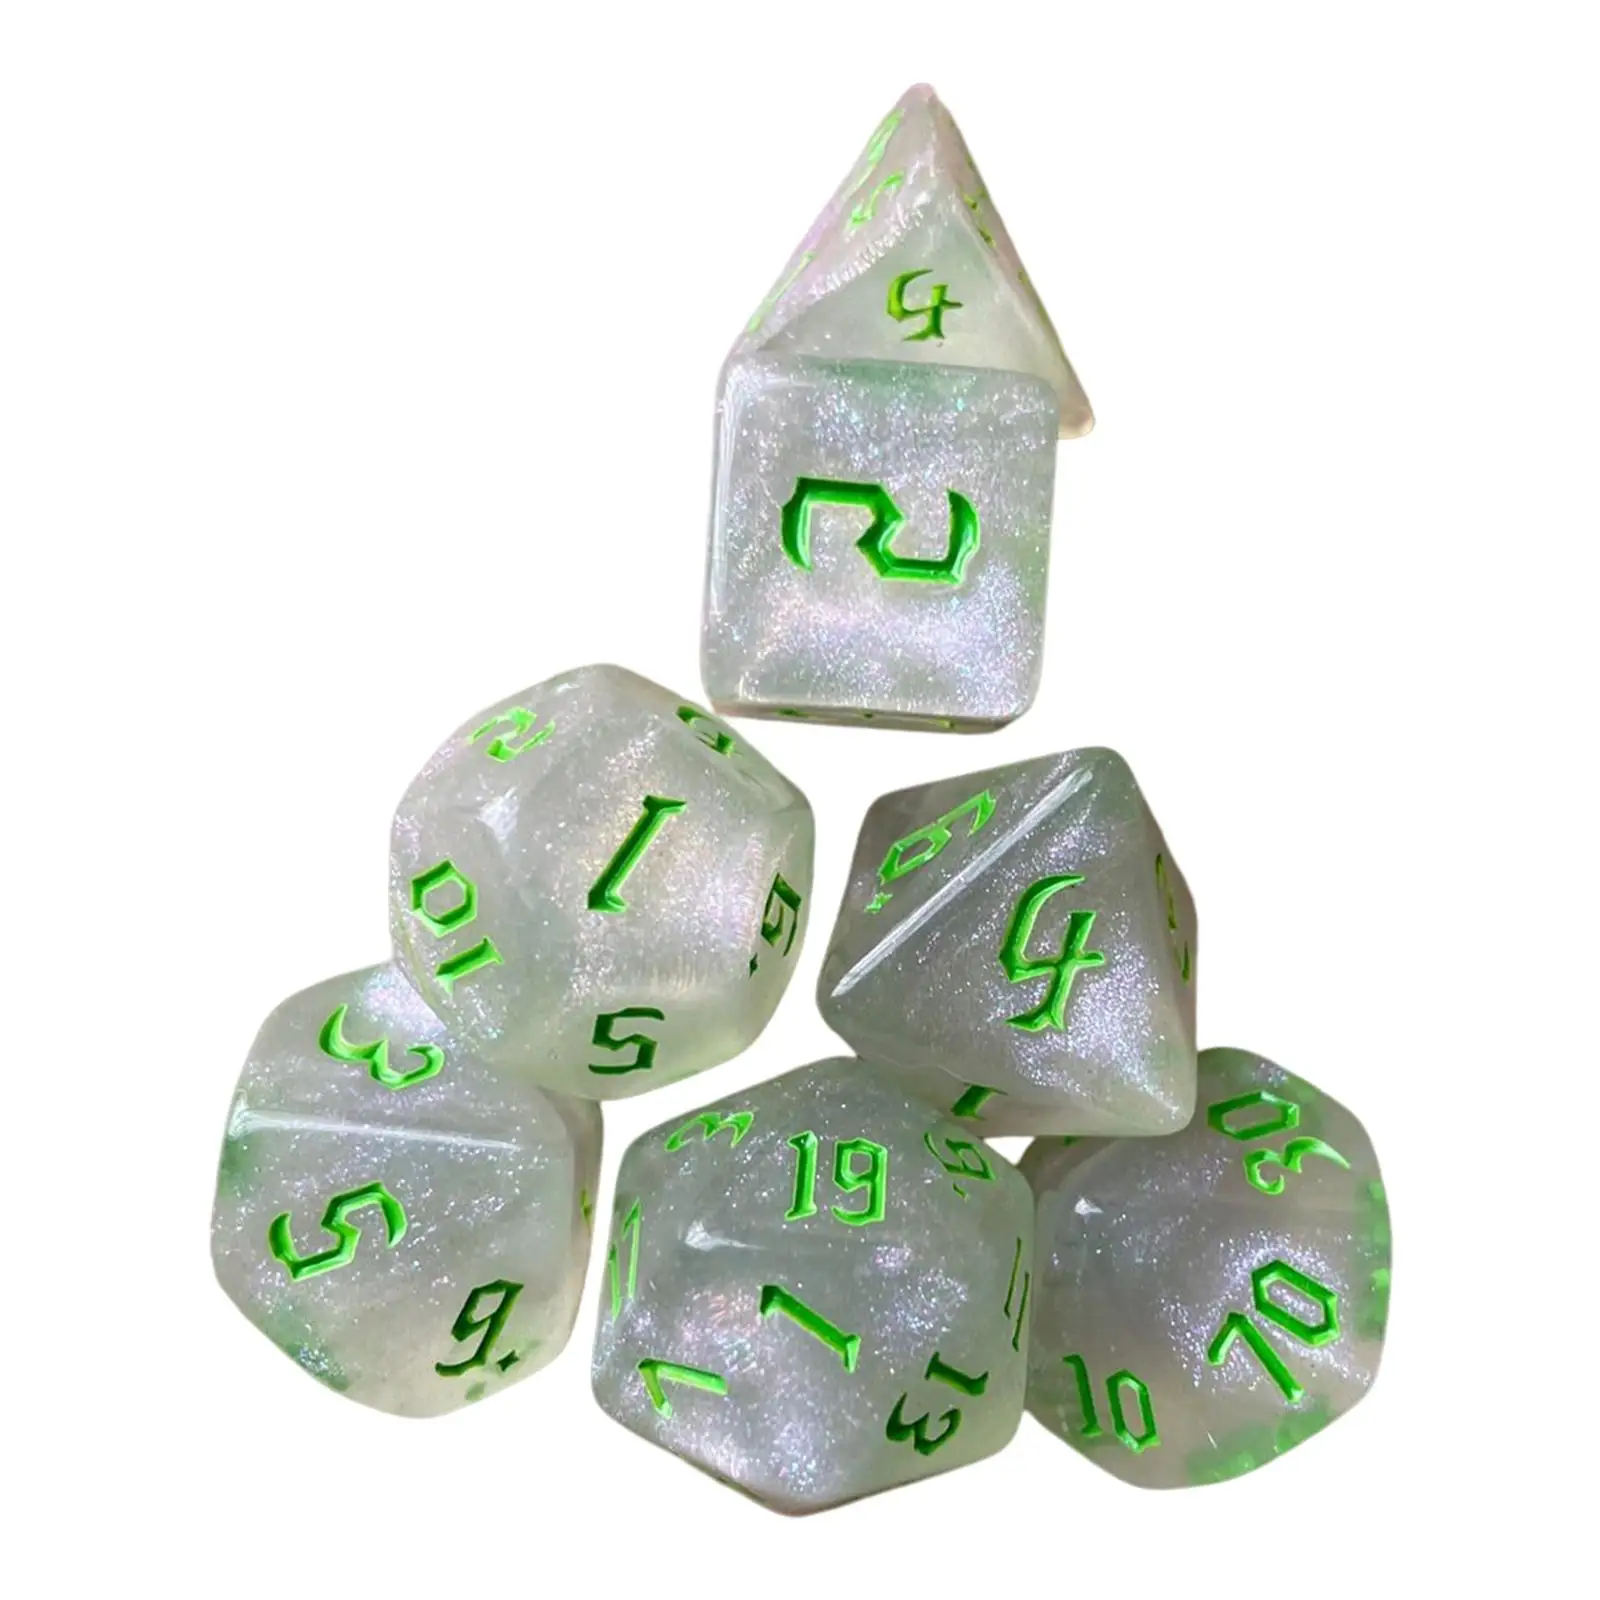 polyhedral 7 piece game dice for parties board games board games